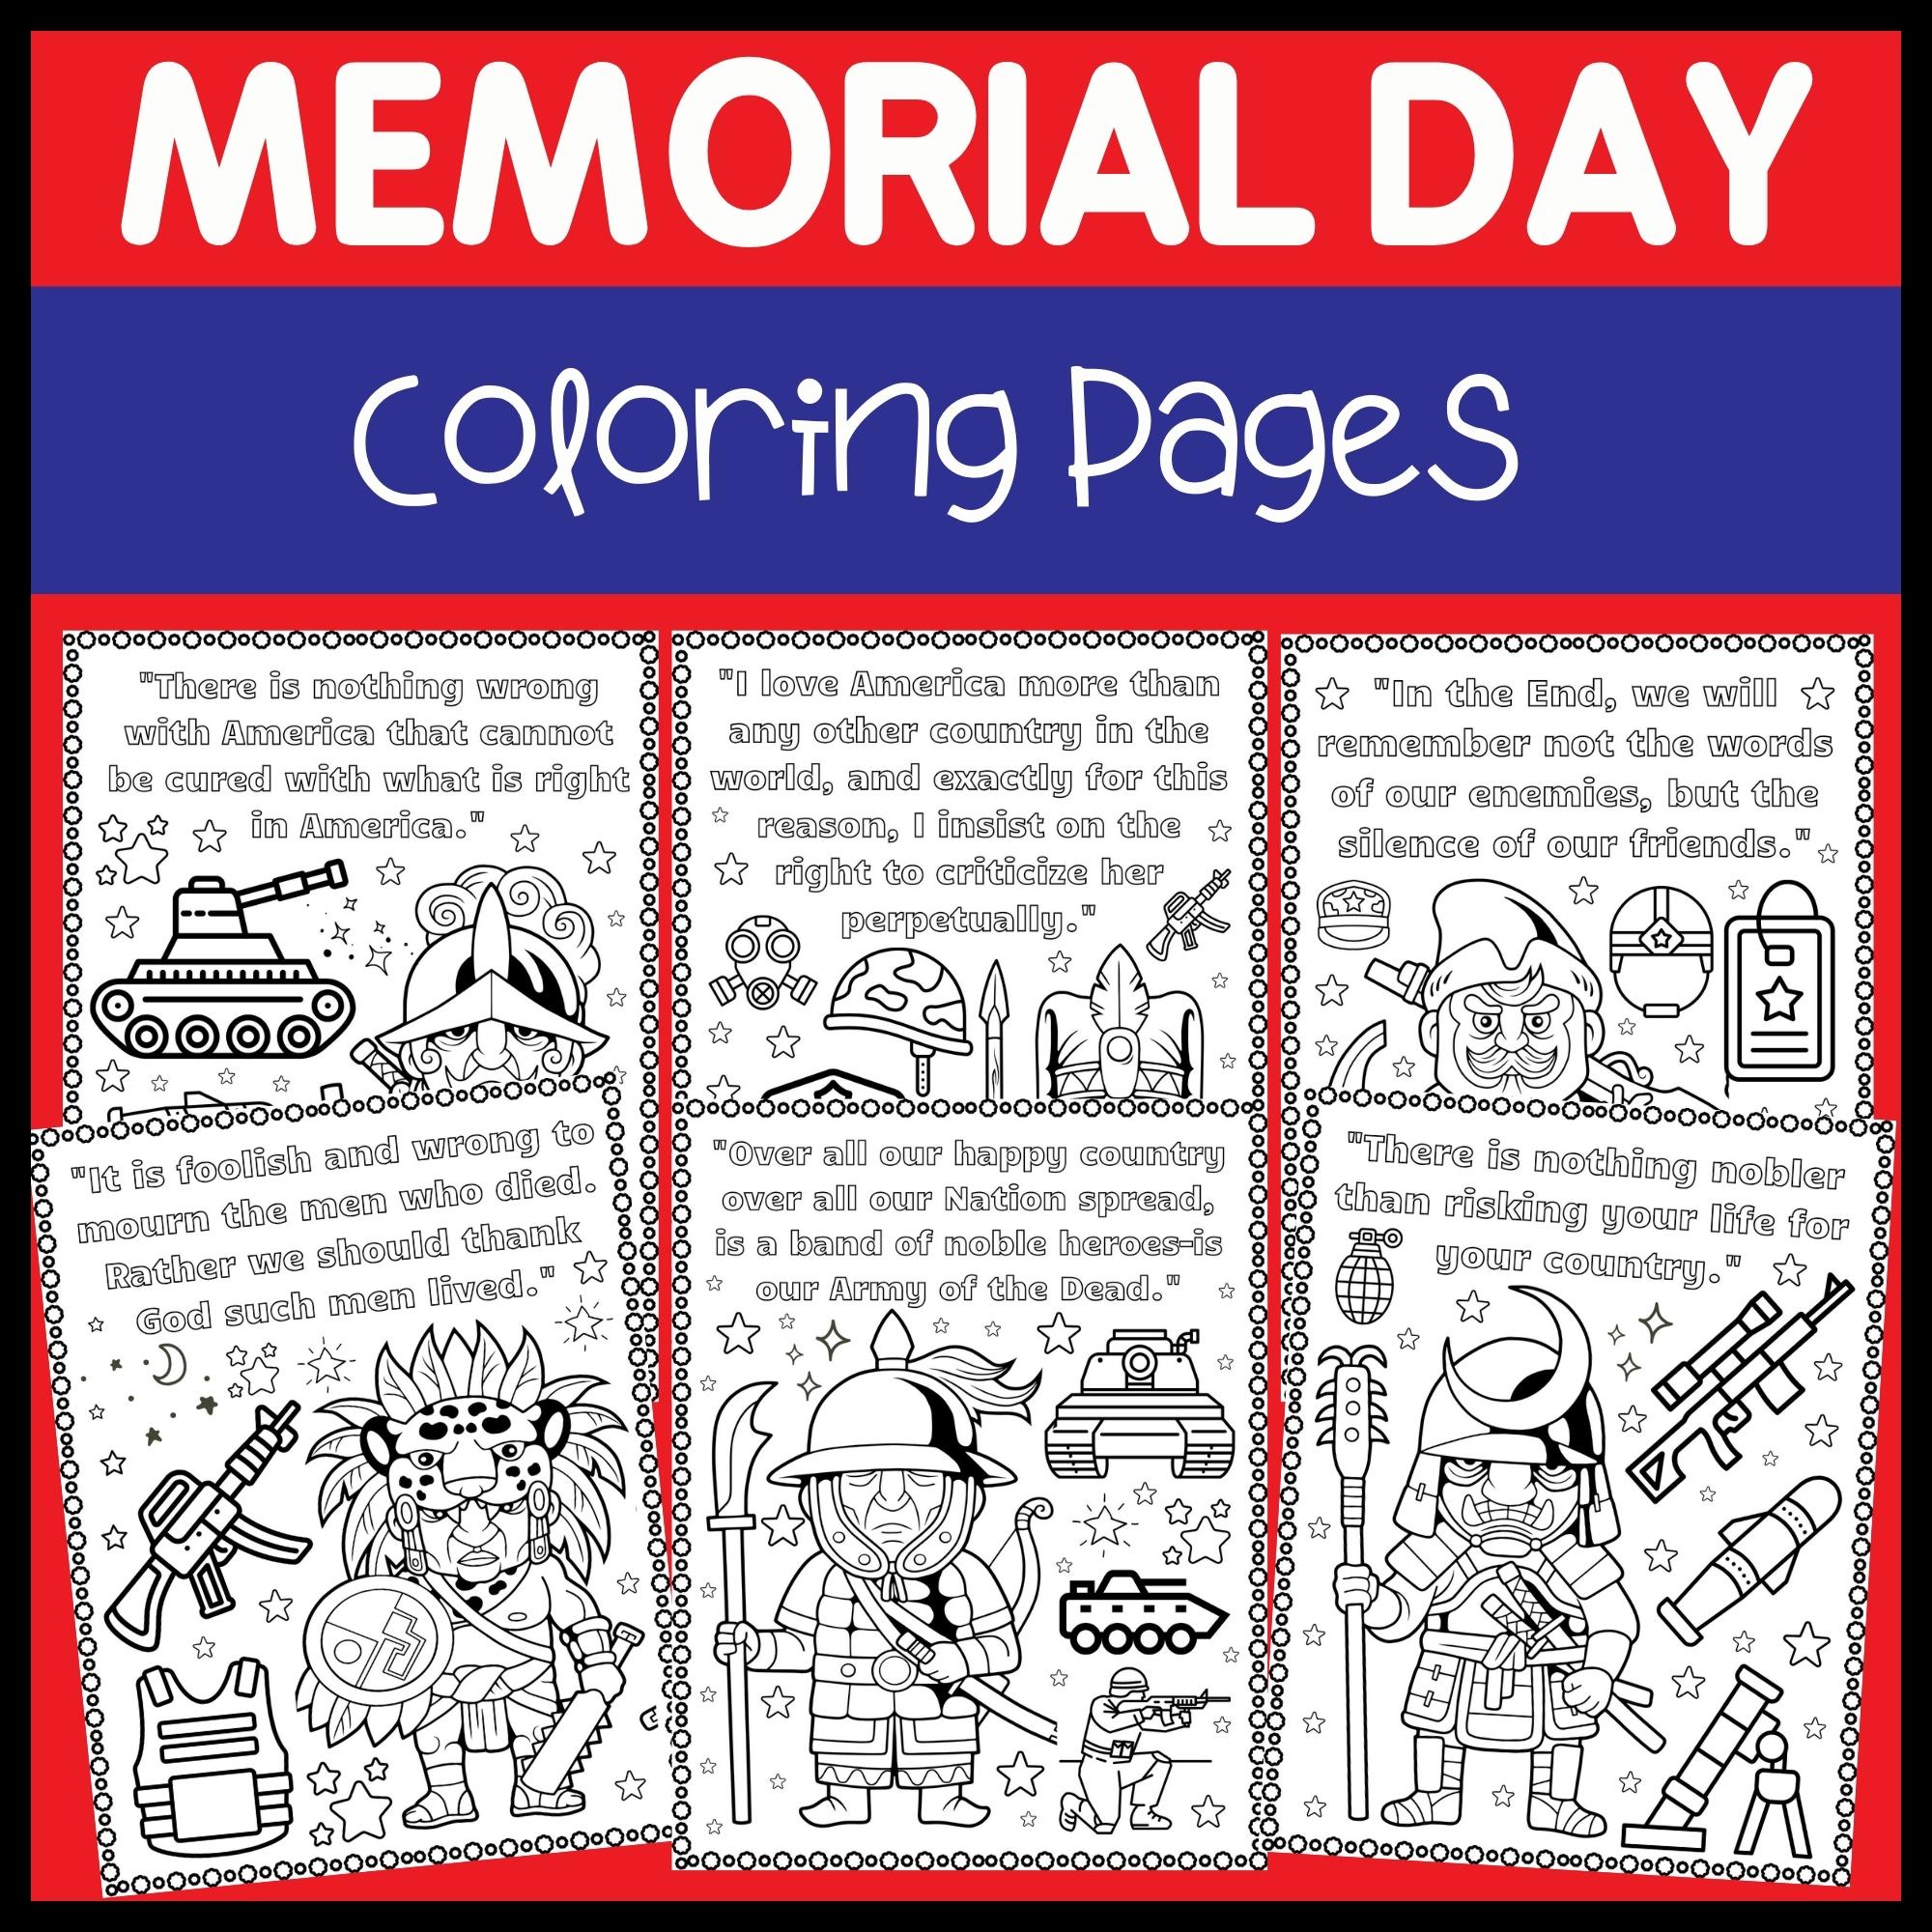 Memorial day coloring pages patriotic coloring sheets inspiring quotes made by teachers